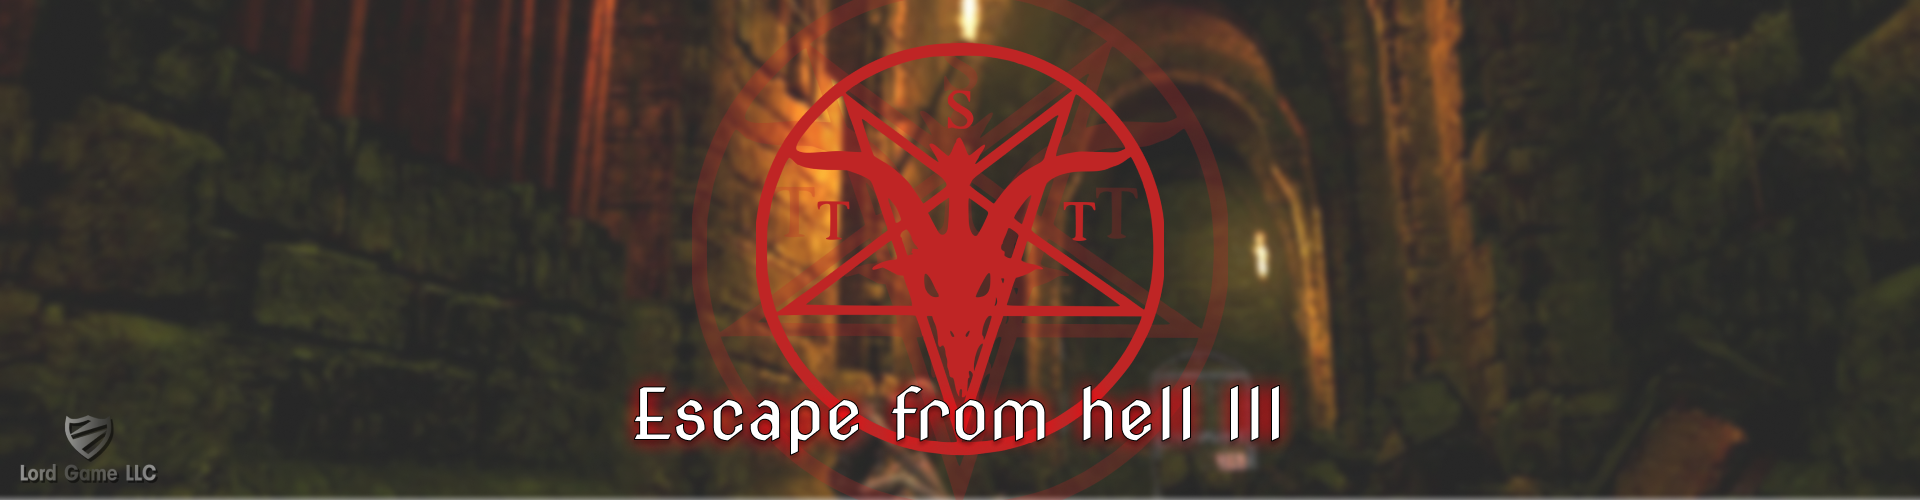 Escape from hell III [PC]